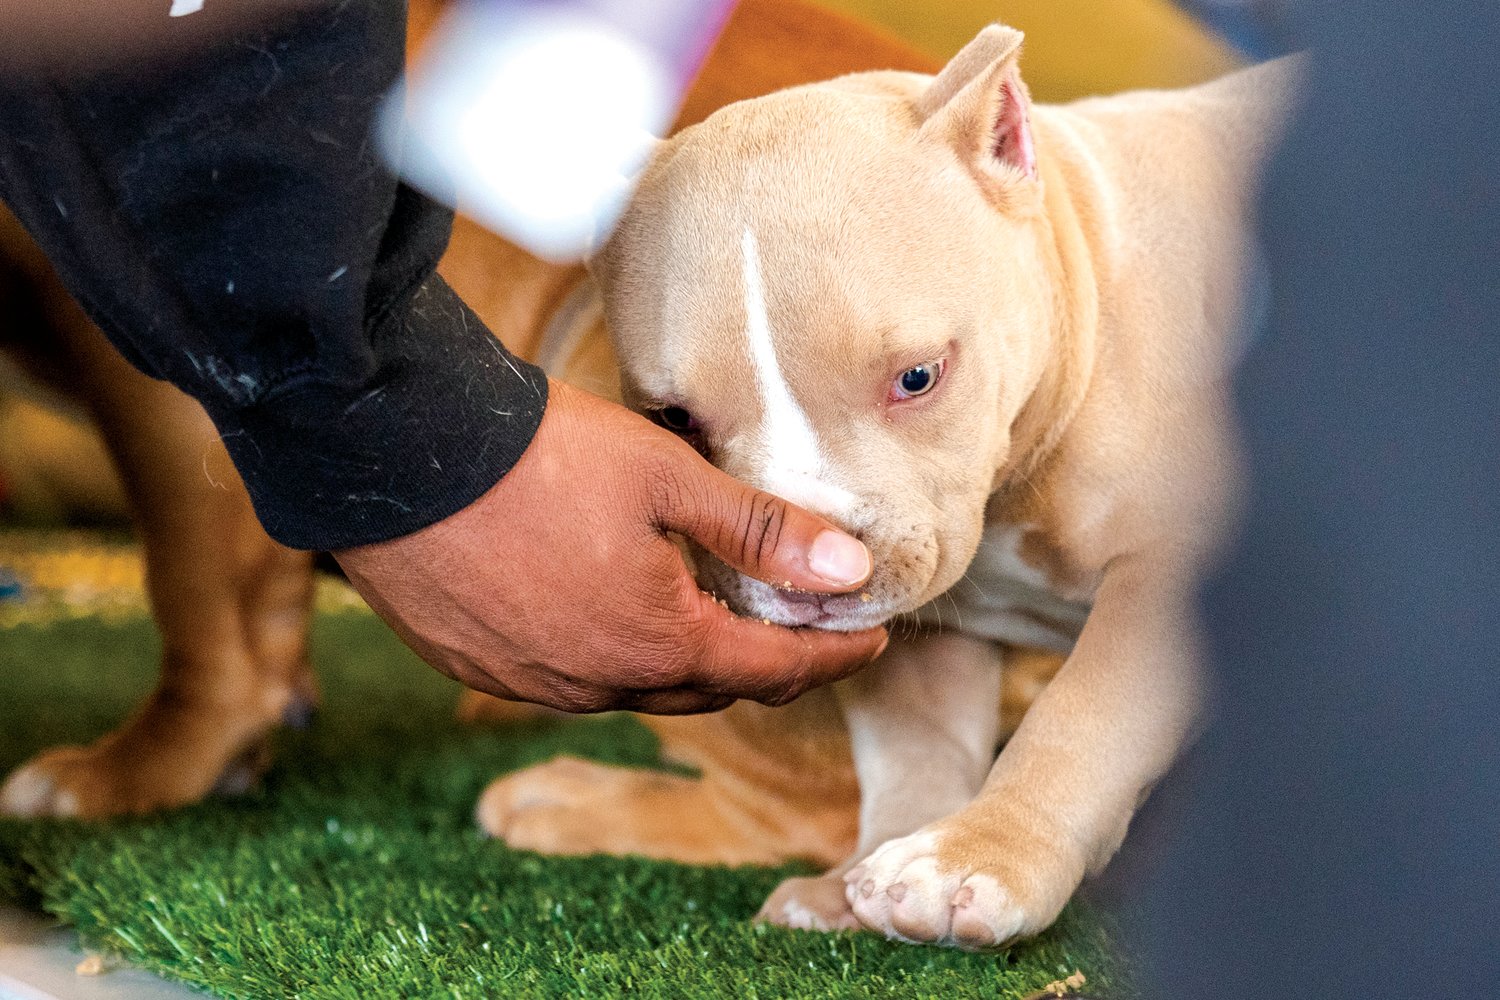 “Bully” puppies receive attention during a show at the Southwest Washington Fairgrounds  Saturday morning. The Beyond Limits Dog Show took place Friday and Saturday at the fairgrounds. Learn more about events online at https://southwestwashingtonfairgrounds.org.